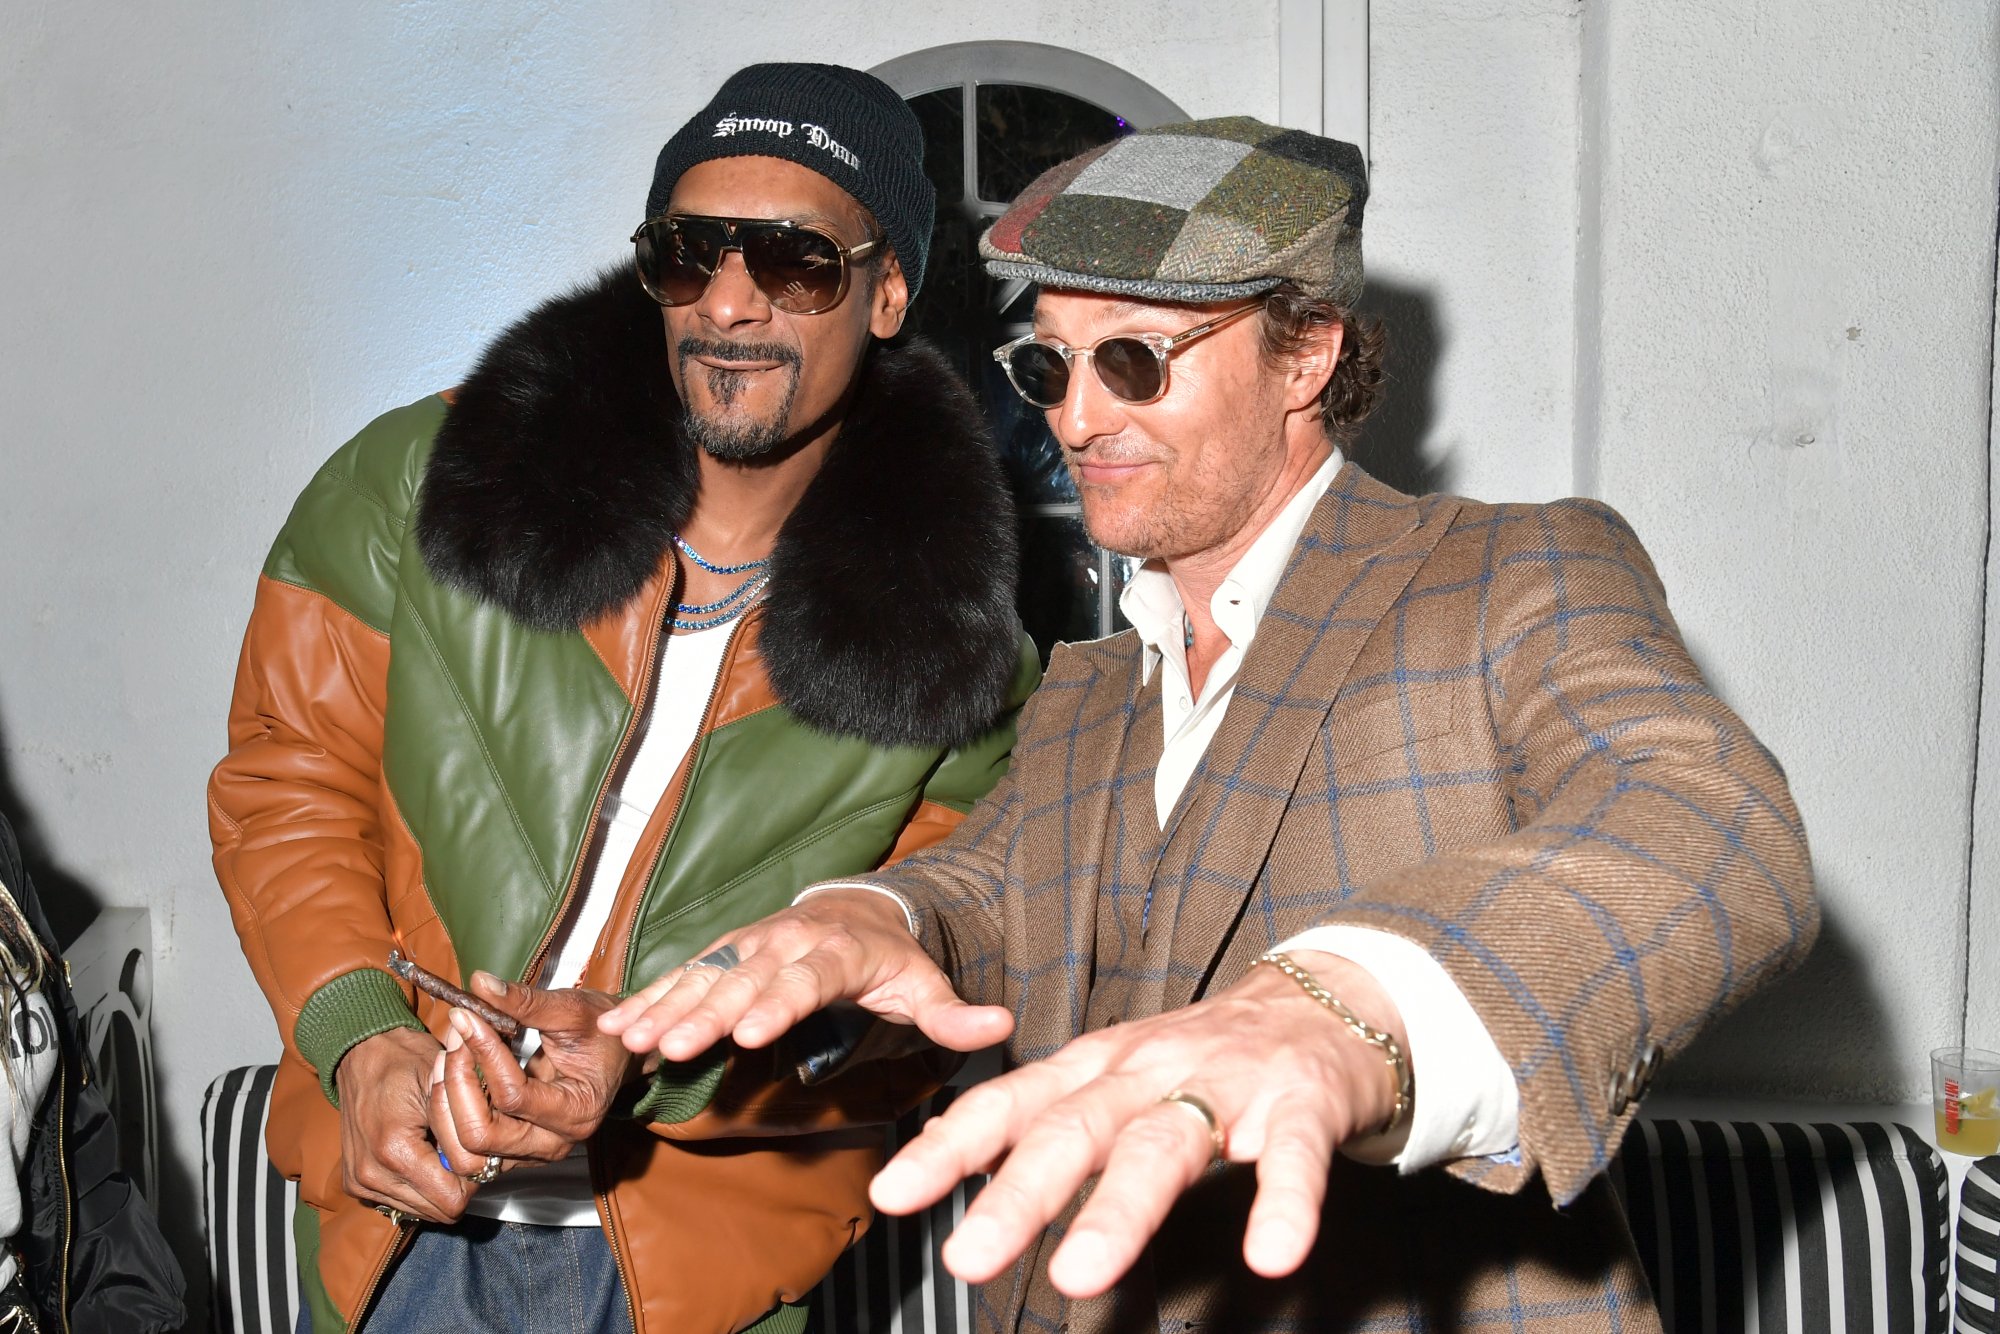 420 Day: Snoop Dogg Swapped Out Matthew McConaughey’s Movie Prop Weed With ‘Real Snoop Weed’